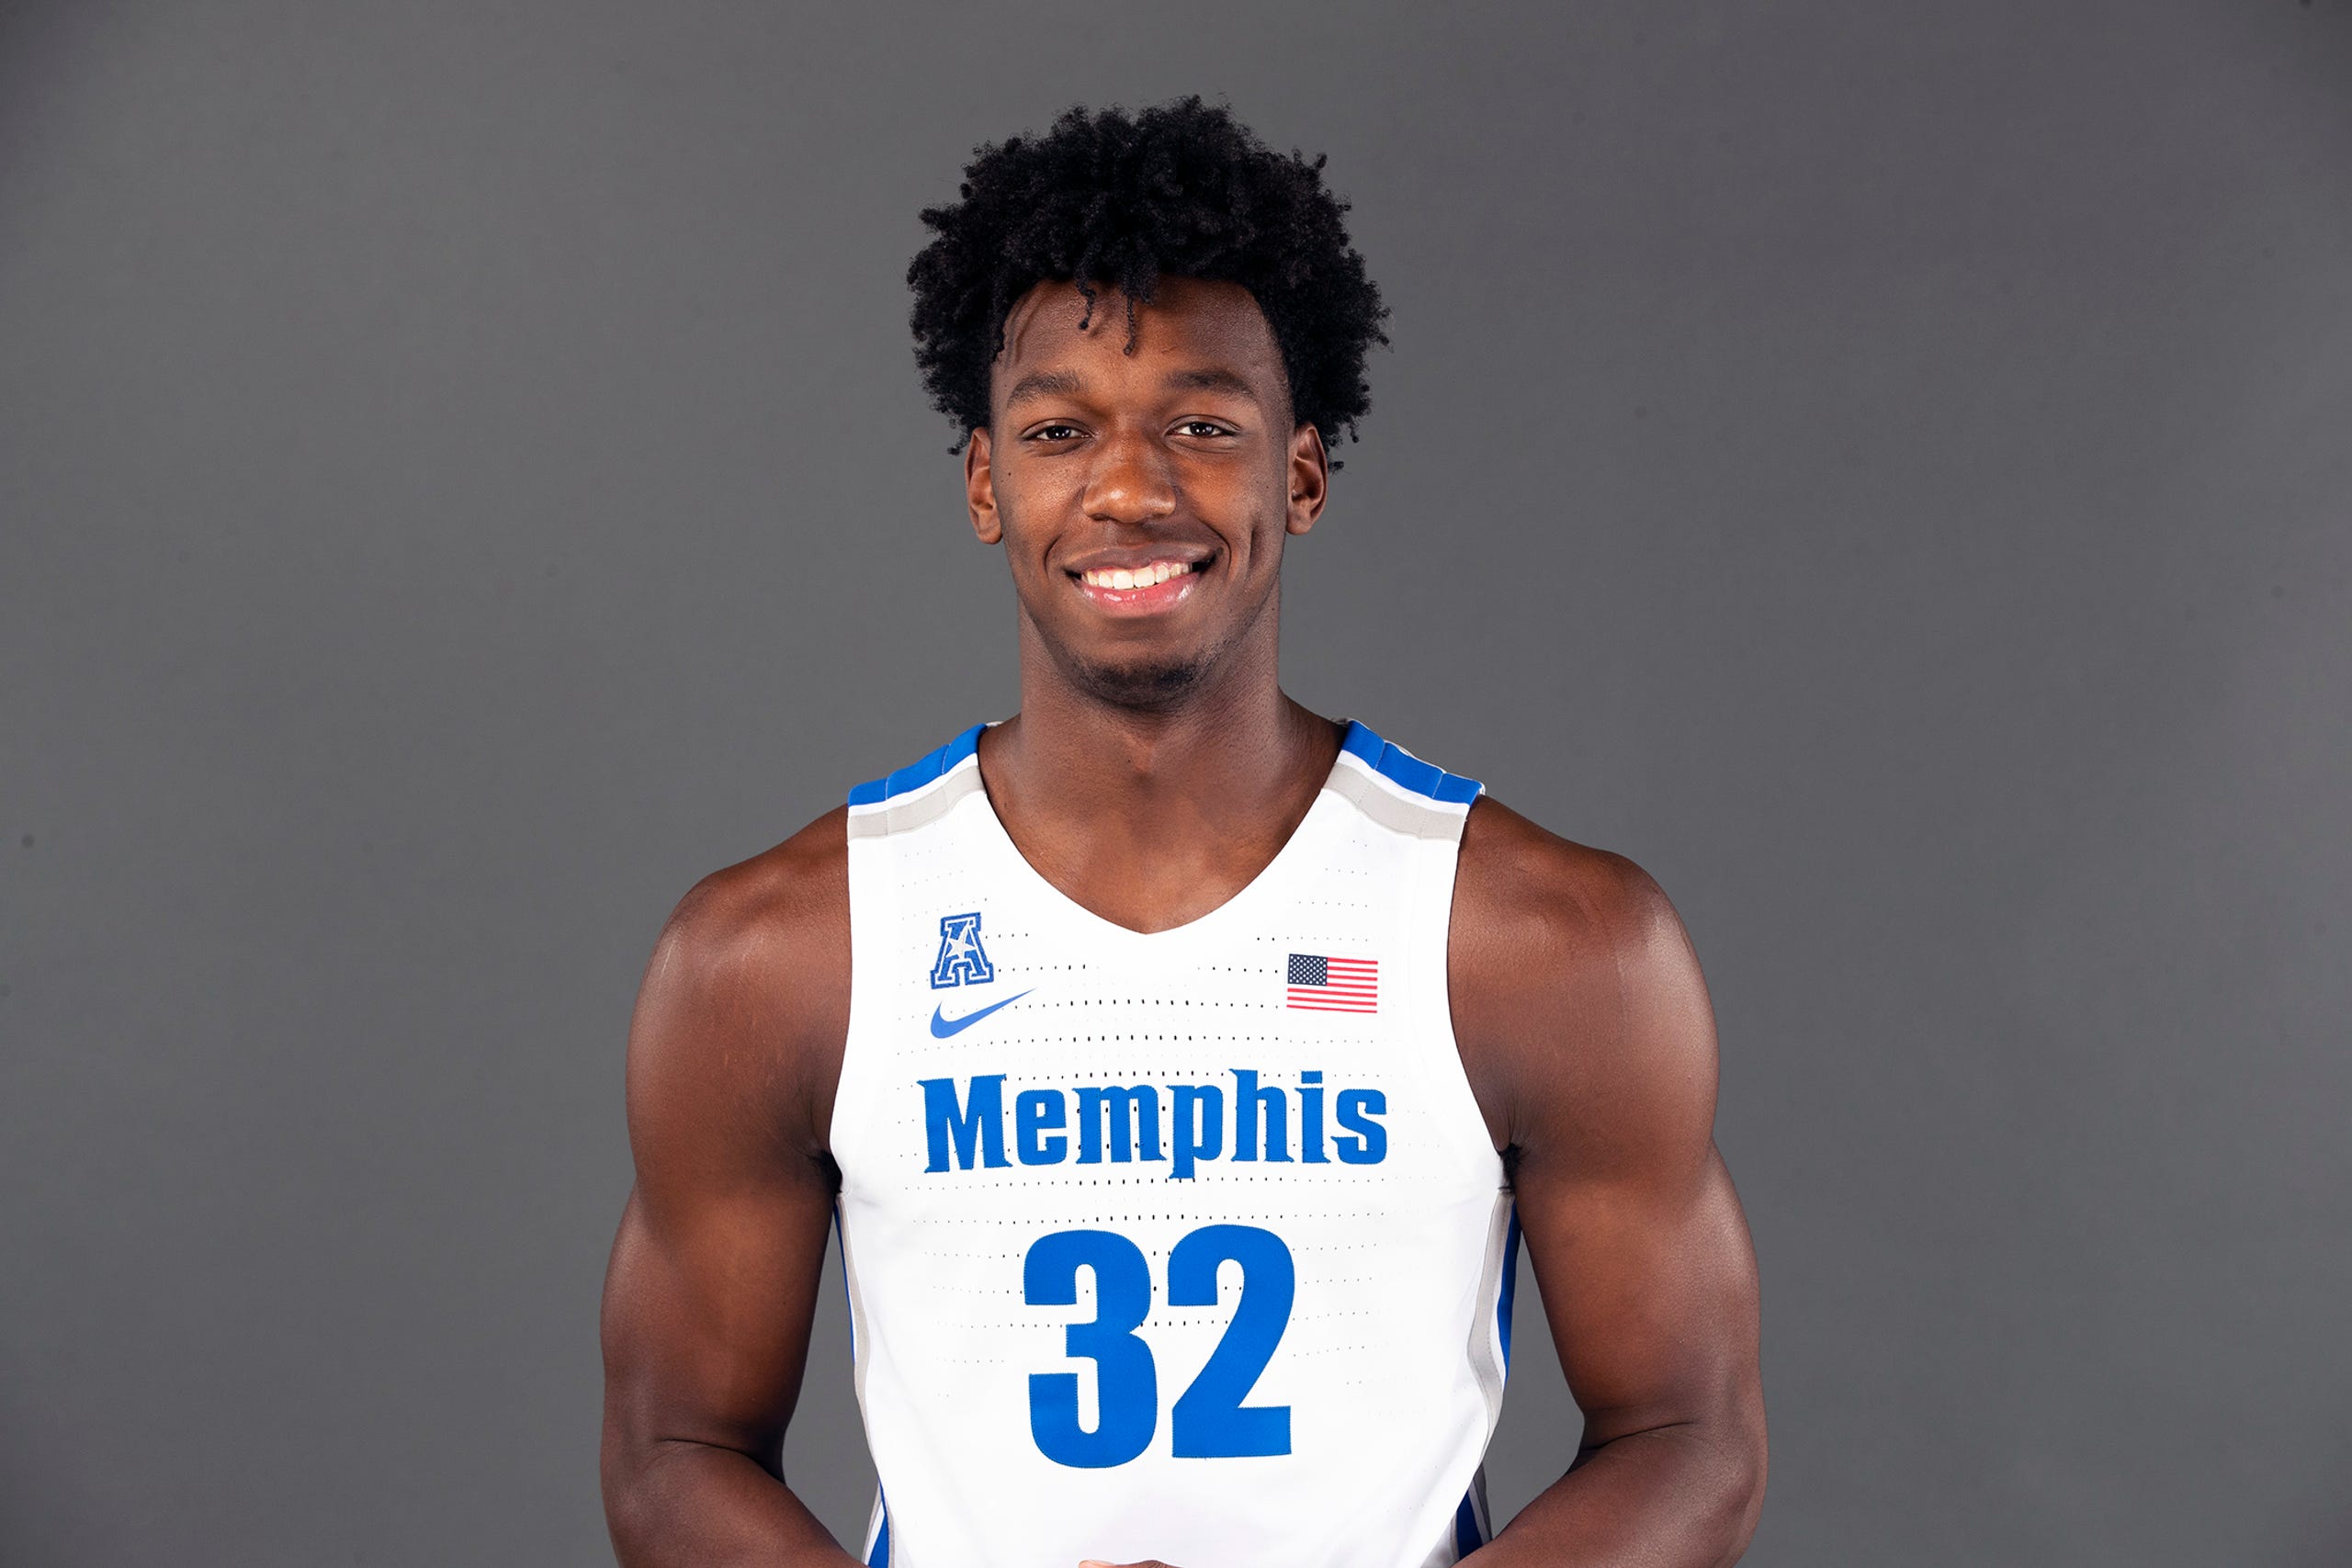 NCAA Ruled Potential #1 Pick James Wiseman Ineligible For This Season